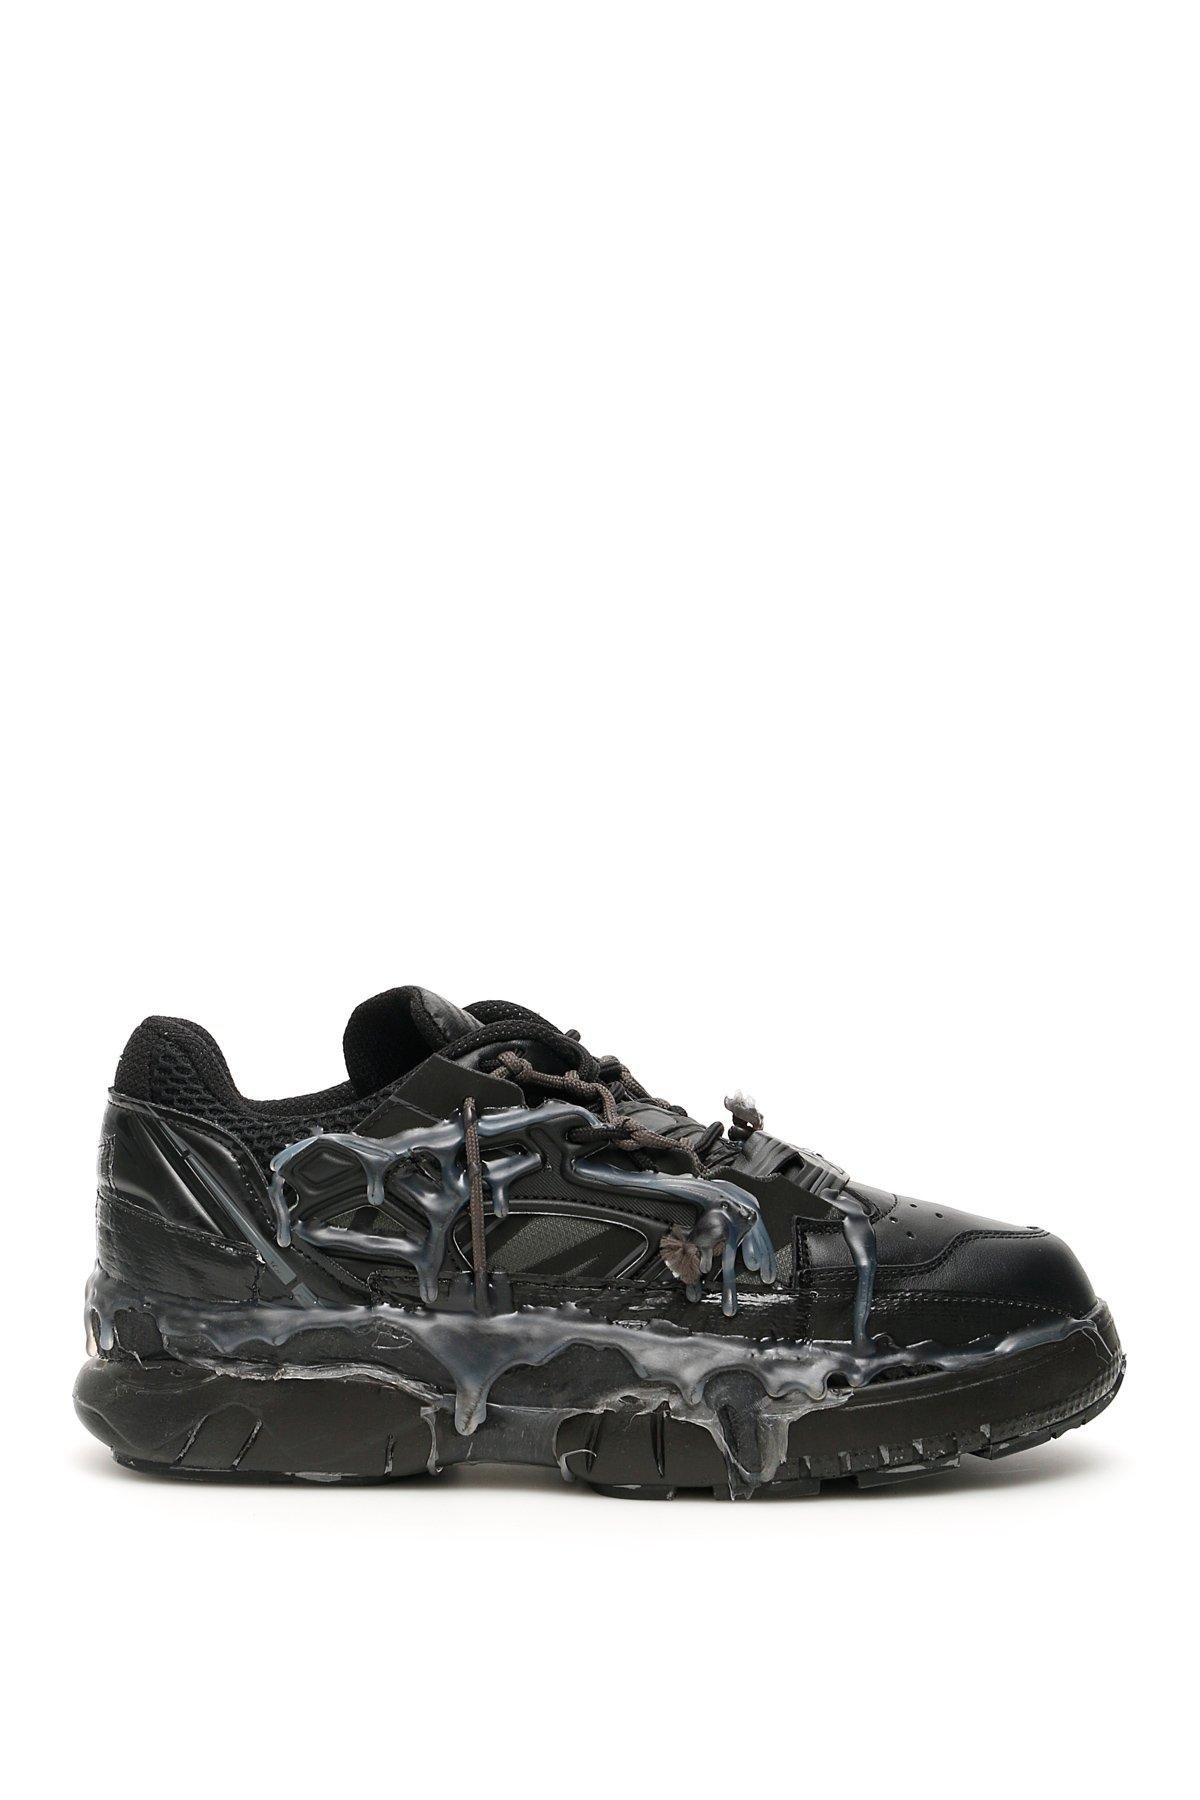 Maison Margiela Fusion Leather And Mesh Trainers in Black for Men | Lyst